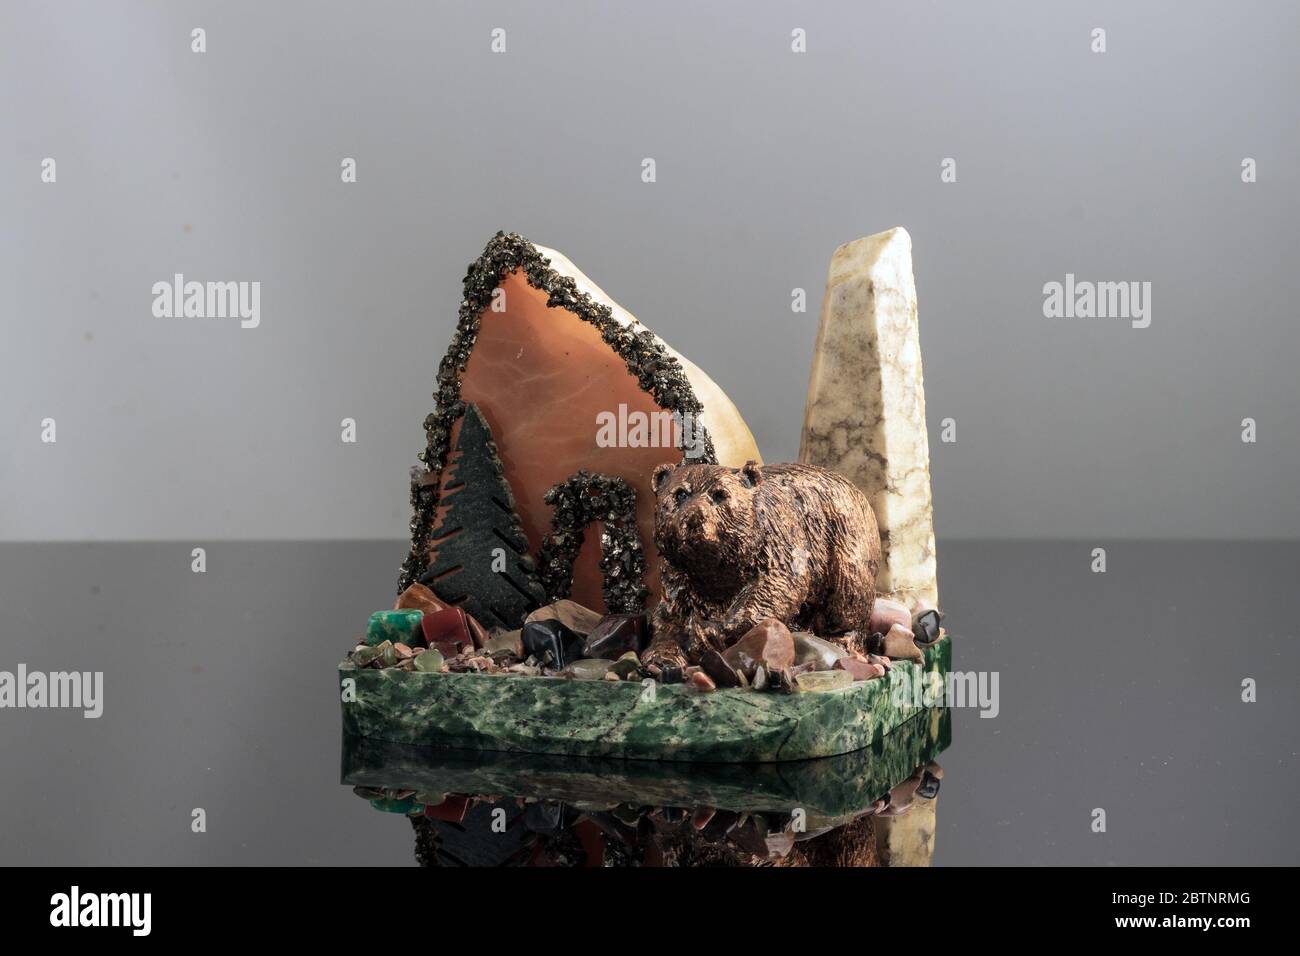 The souvenir of stone and plaster is a mountain, stones and bear. Stock Photo